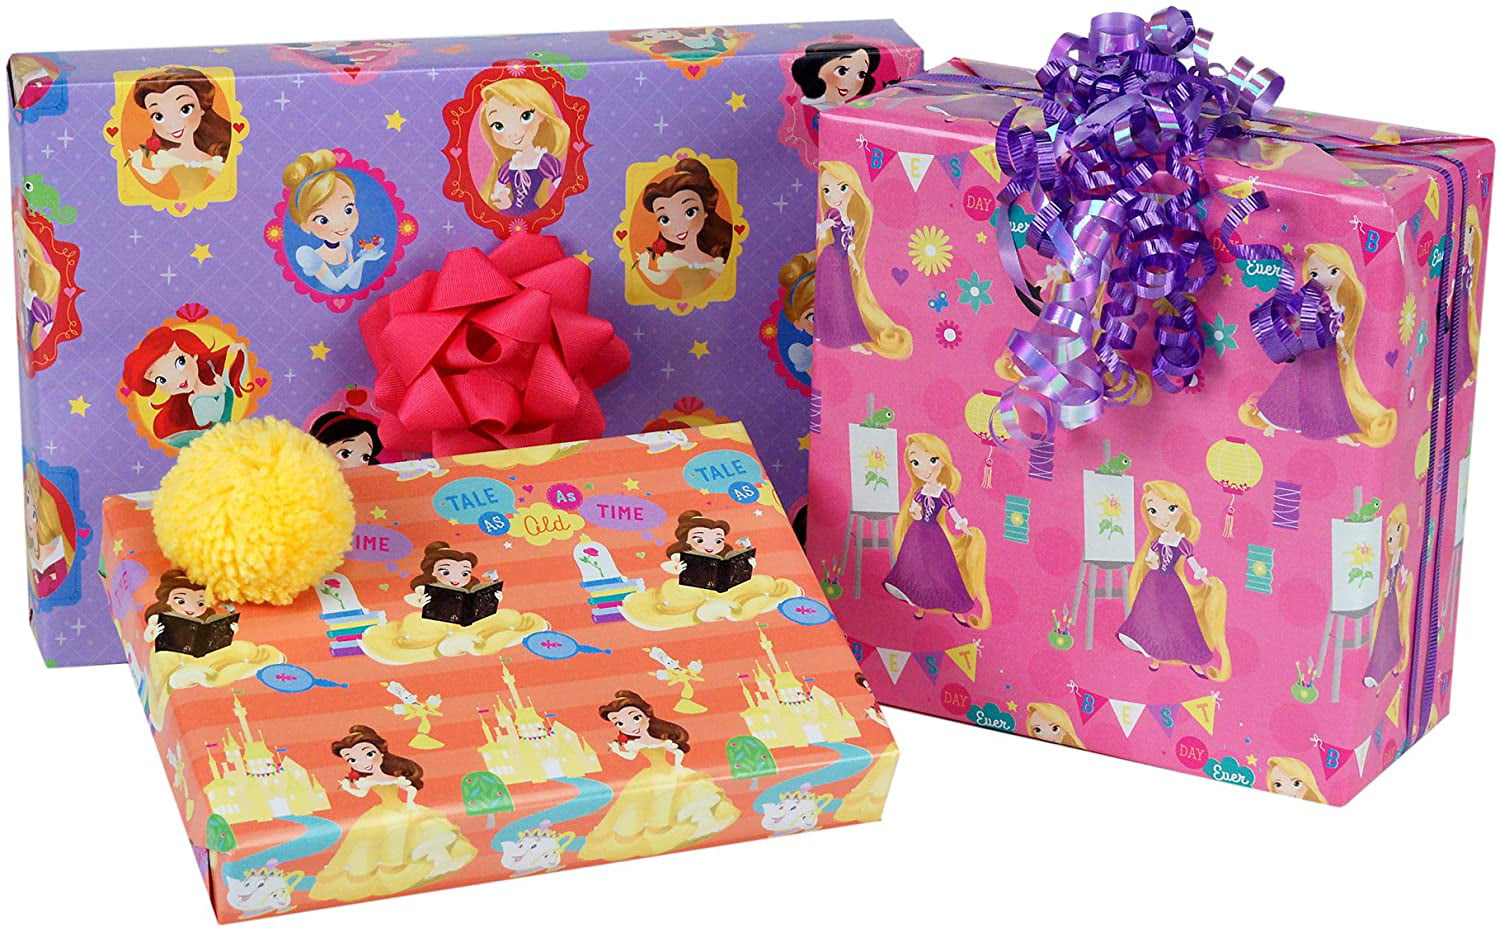 Hallmark Disney Princess Wrapping Paper with Cut Lines